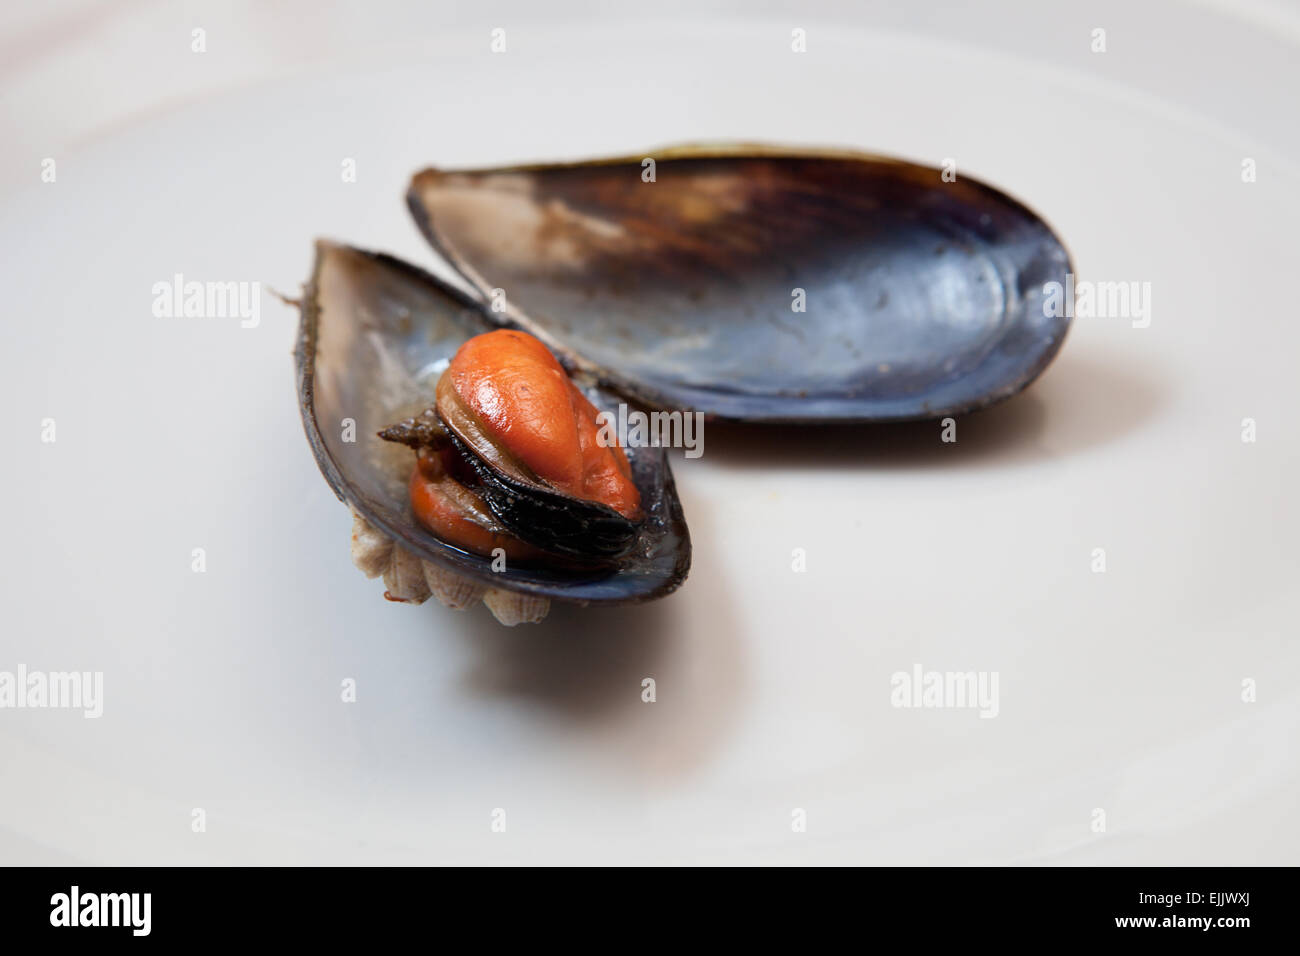 Close detail view of mussel boiled on a plate. Isolated on a white background Stock Photo